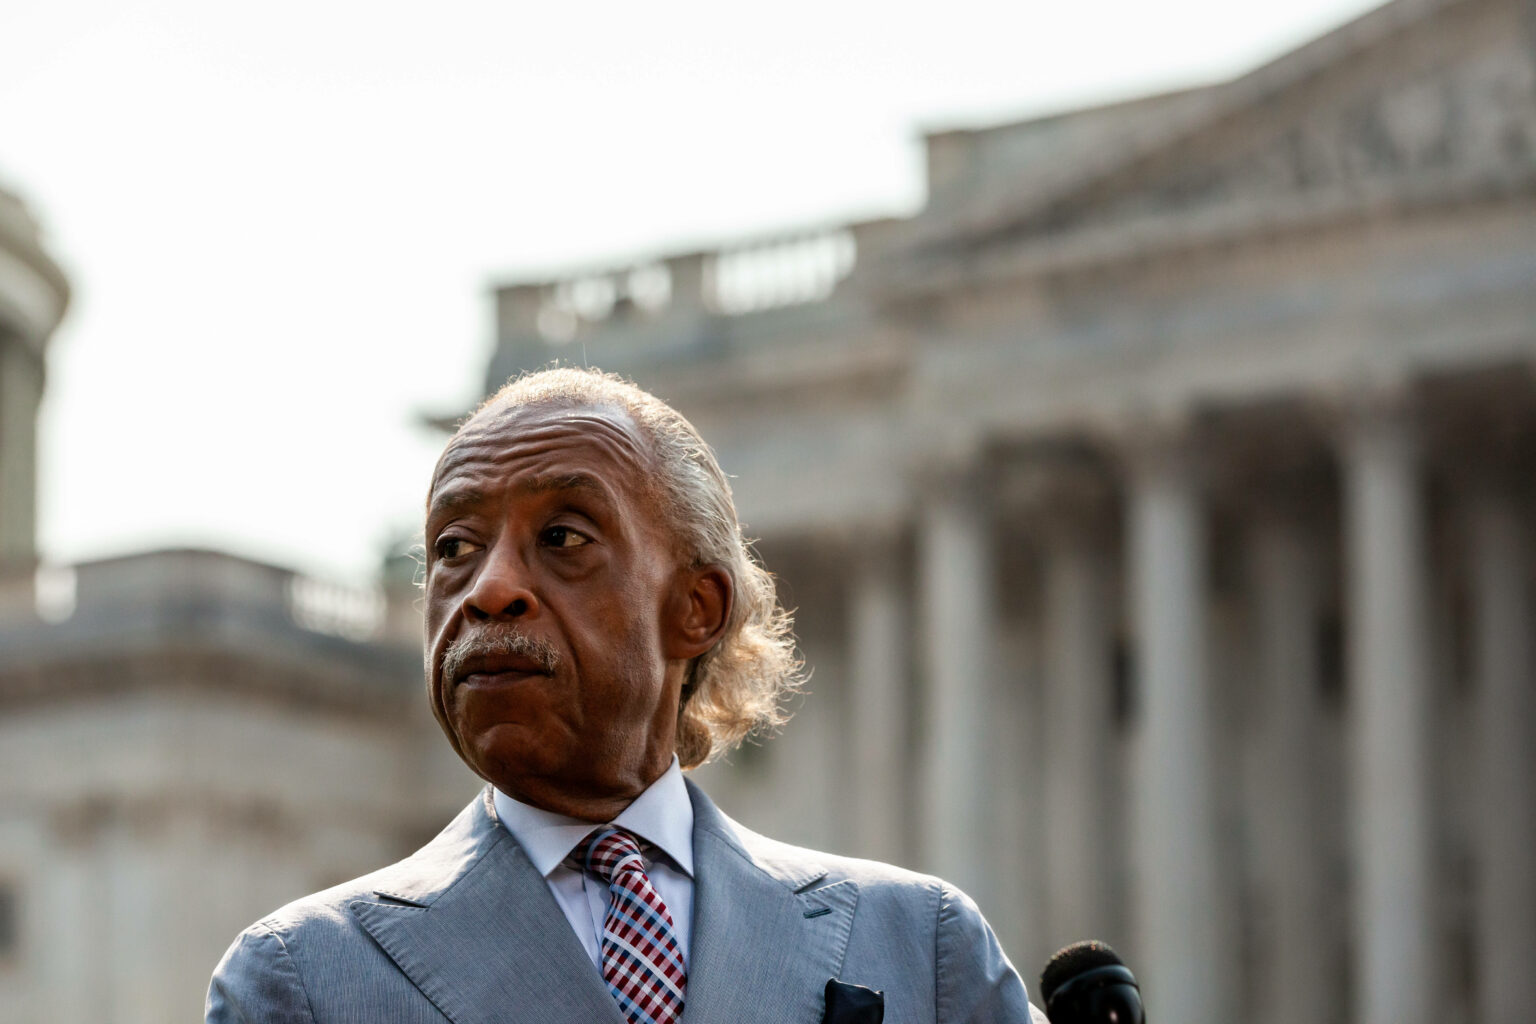 IMAGO / NurPhoto / Allison Bailey | Reverend Al Sharpton holds a press conference along with Arndrea Watters King, and Martin Luther King III after Senate Minority Leader Mitch McConnell refused to accept their letter on voting rights. Washington DC. September 13, 2021.